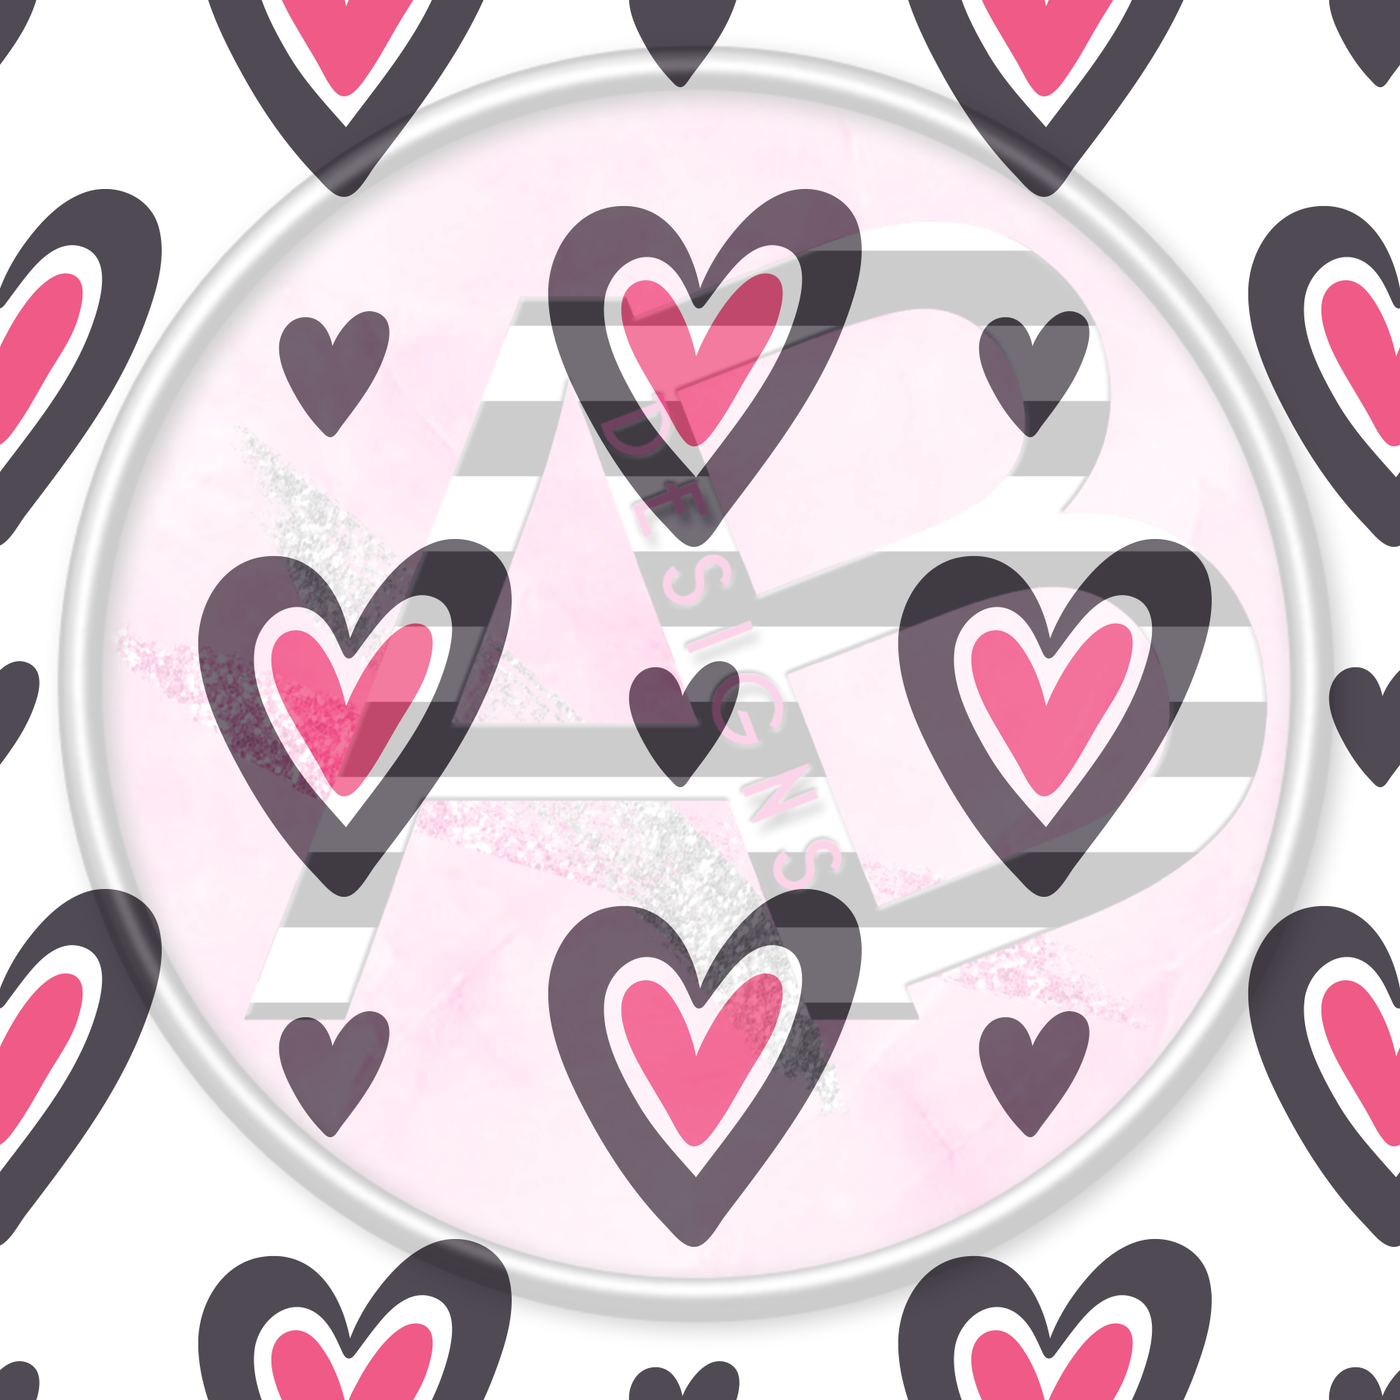 Adhesive Patterned Vinyl - Hearts 10